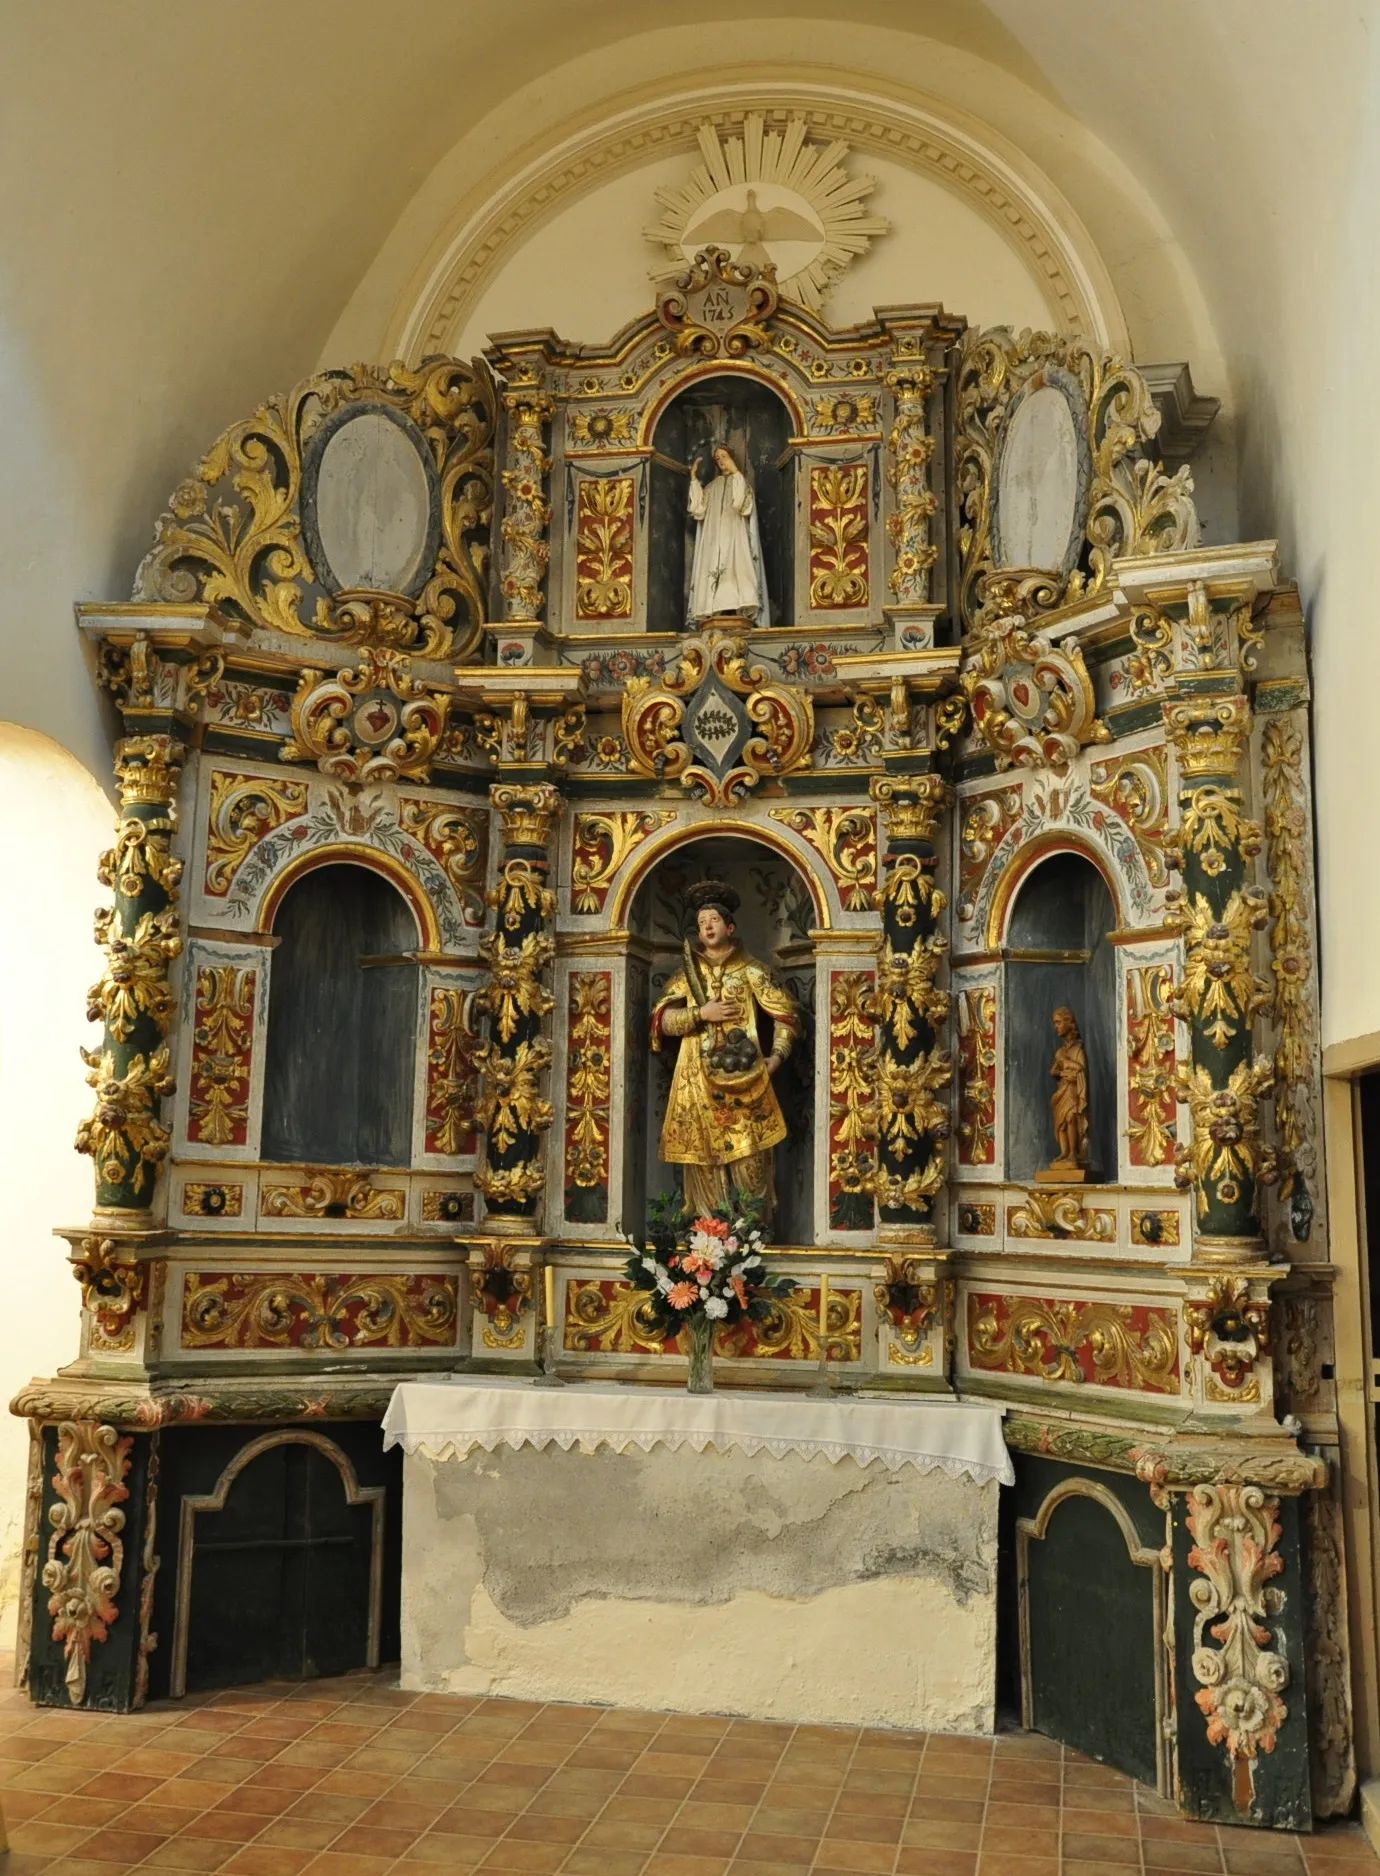 Photo showing: Altarpiece of St. Stephen (1745) from Castilló de Tor, a village in the municipality El Pont de Suert (Alta Ribagorça district, Catalonia, northern Spain). This altarpiece is exhibited in the "Museu d'Art Sacre de la Ribagorça" (Museum of Holy/Religious Art of the Ribagorça), located in the old parish church of El Pont de Suert.